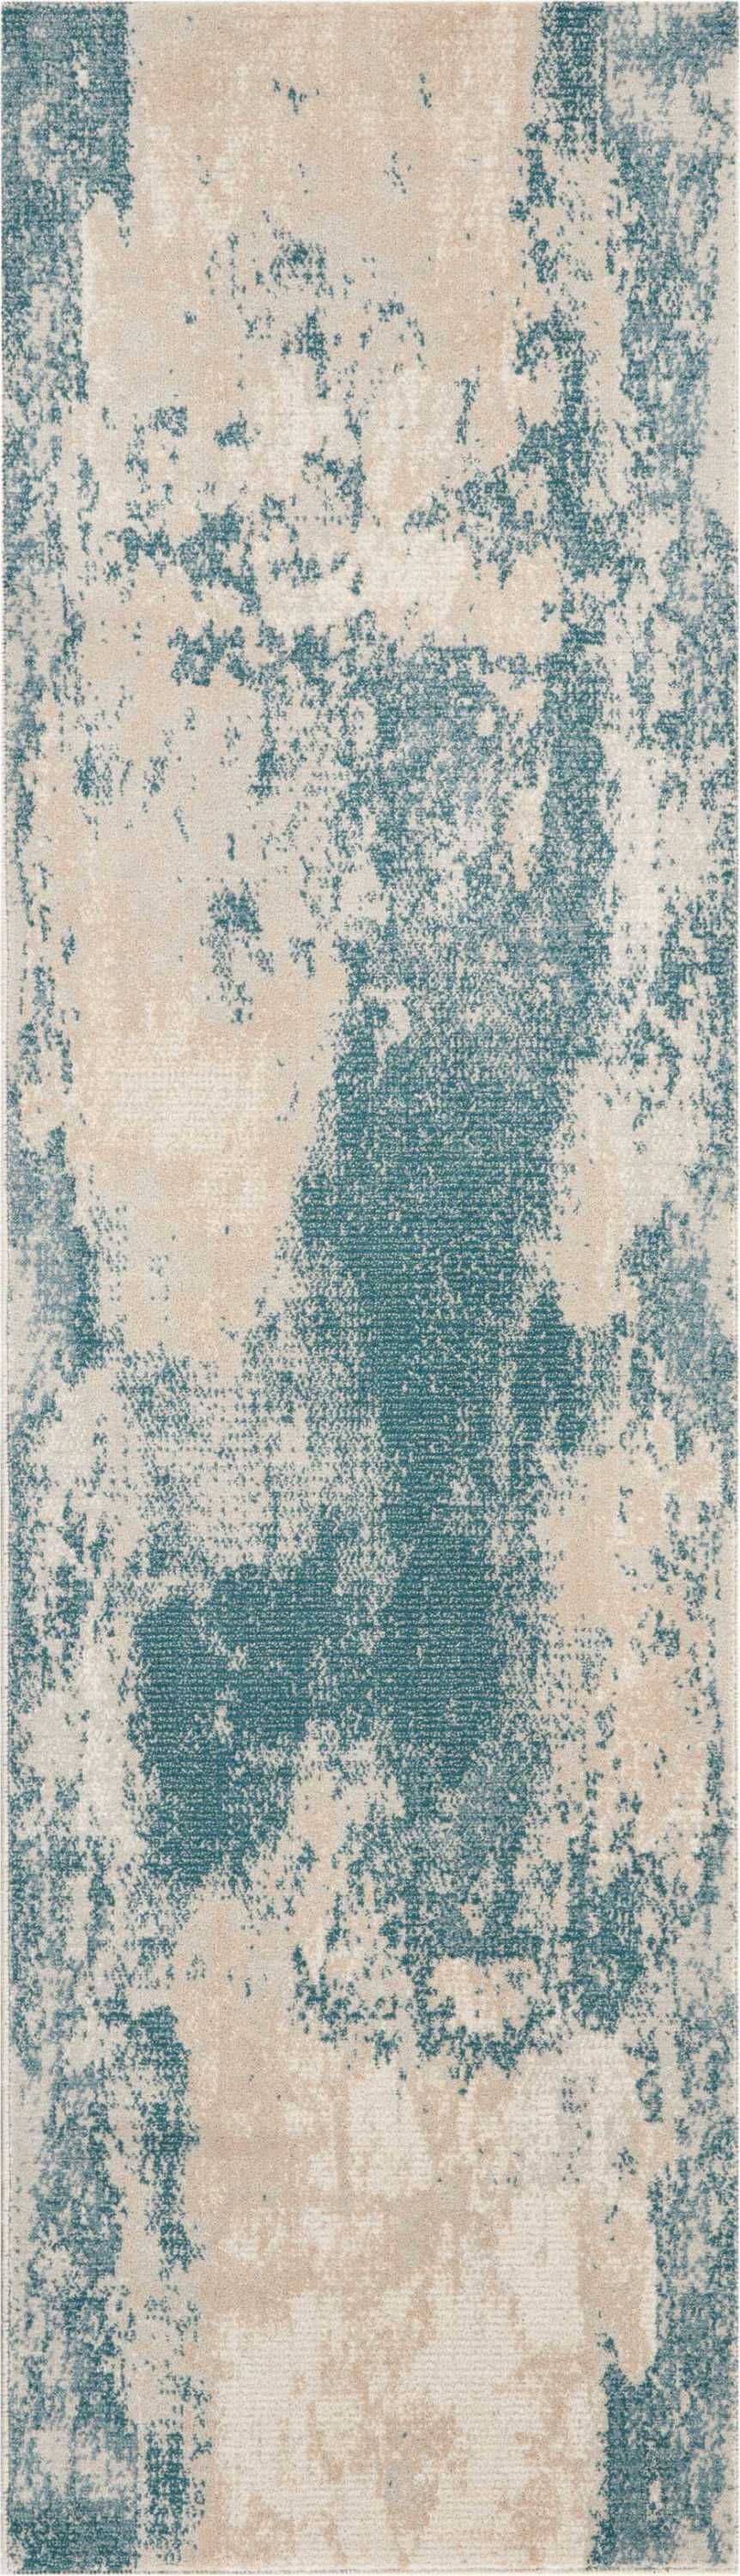 Nourison Maxell MAE13 Blue and White 8' Runner Hallway Rug MAE13 Ivory/Teal